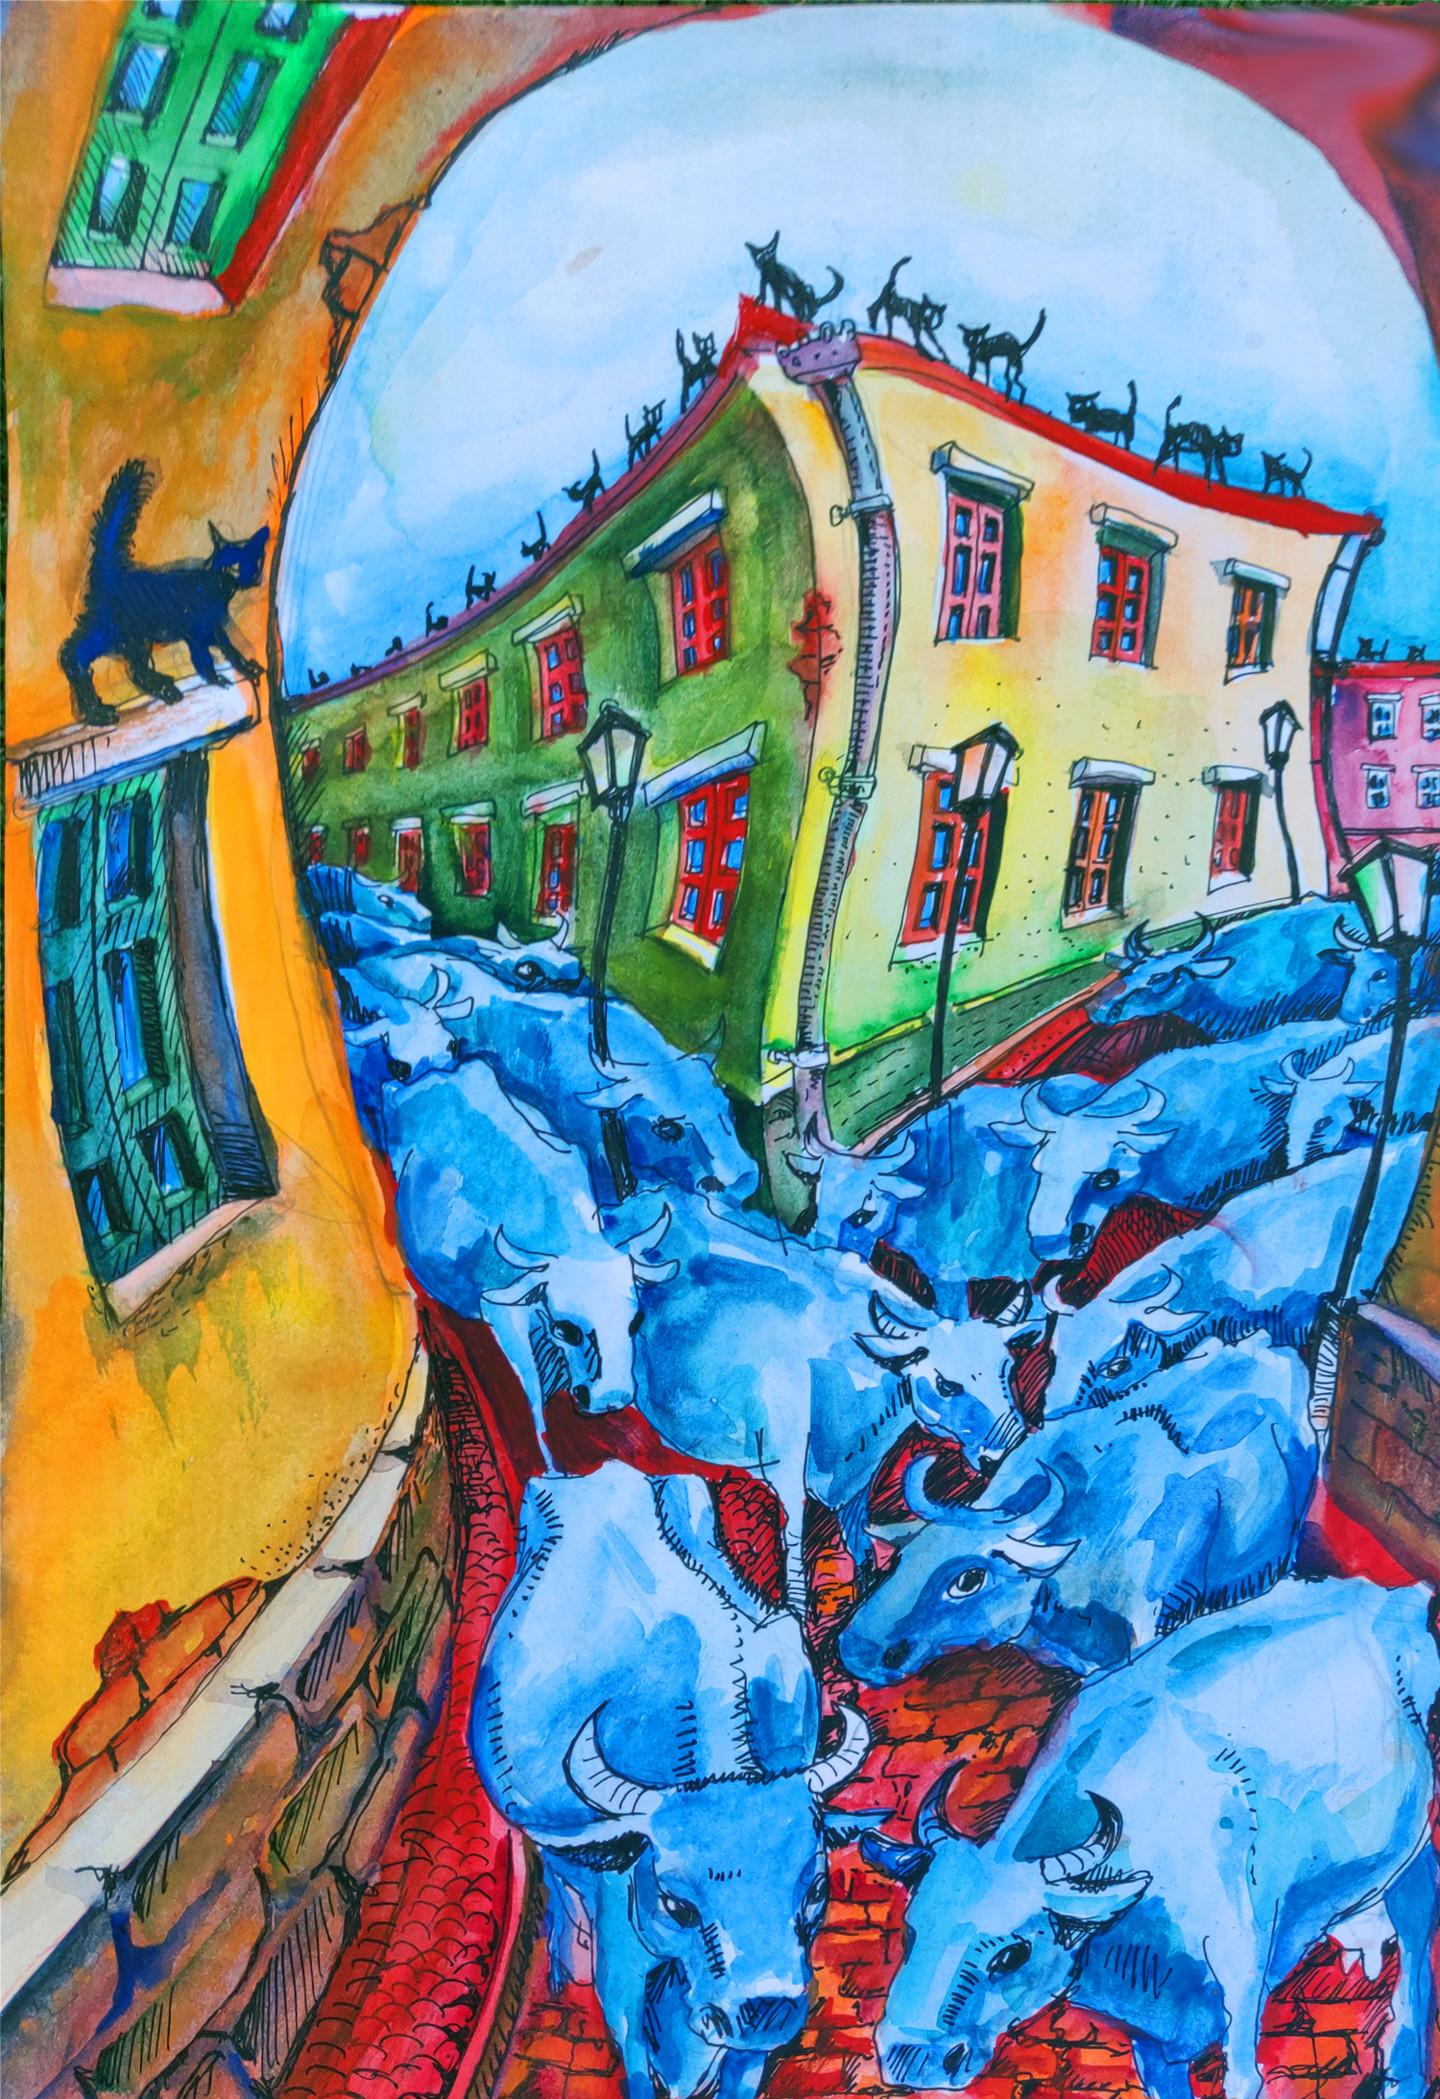 Zenya Gorlik - "Black cats are surprised to look at the blue cows